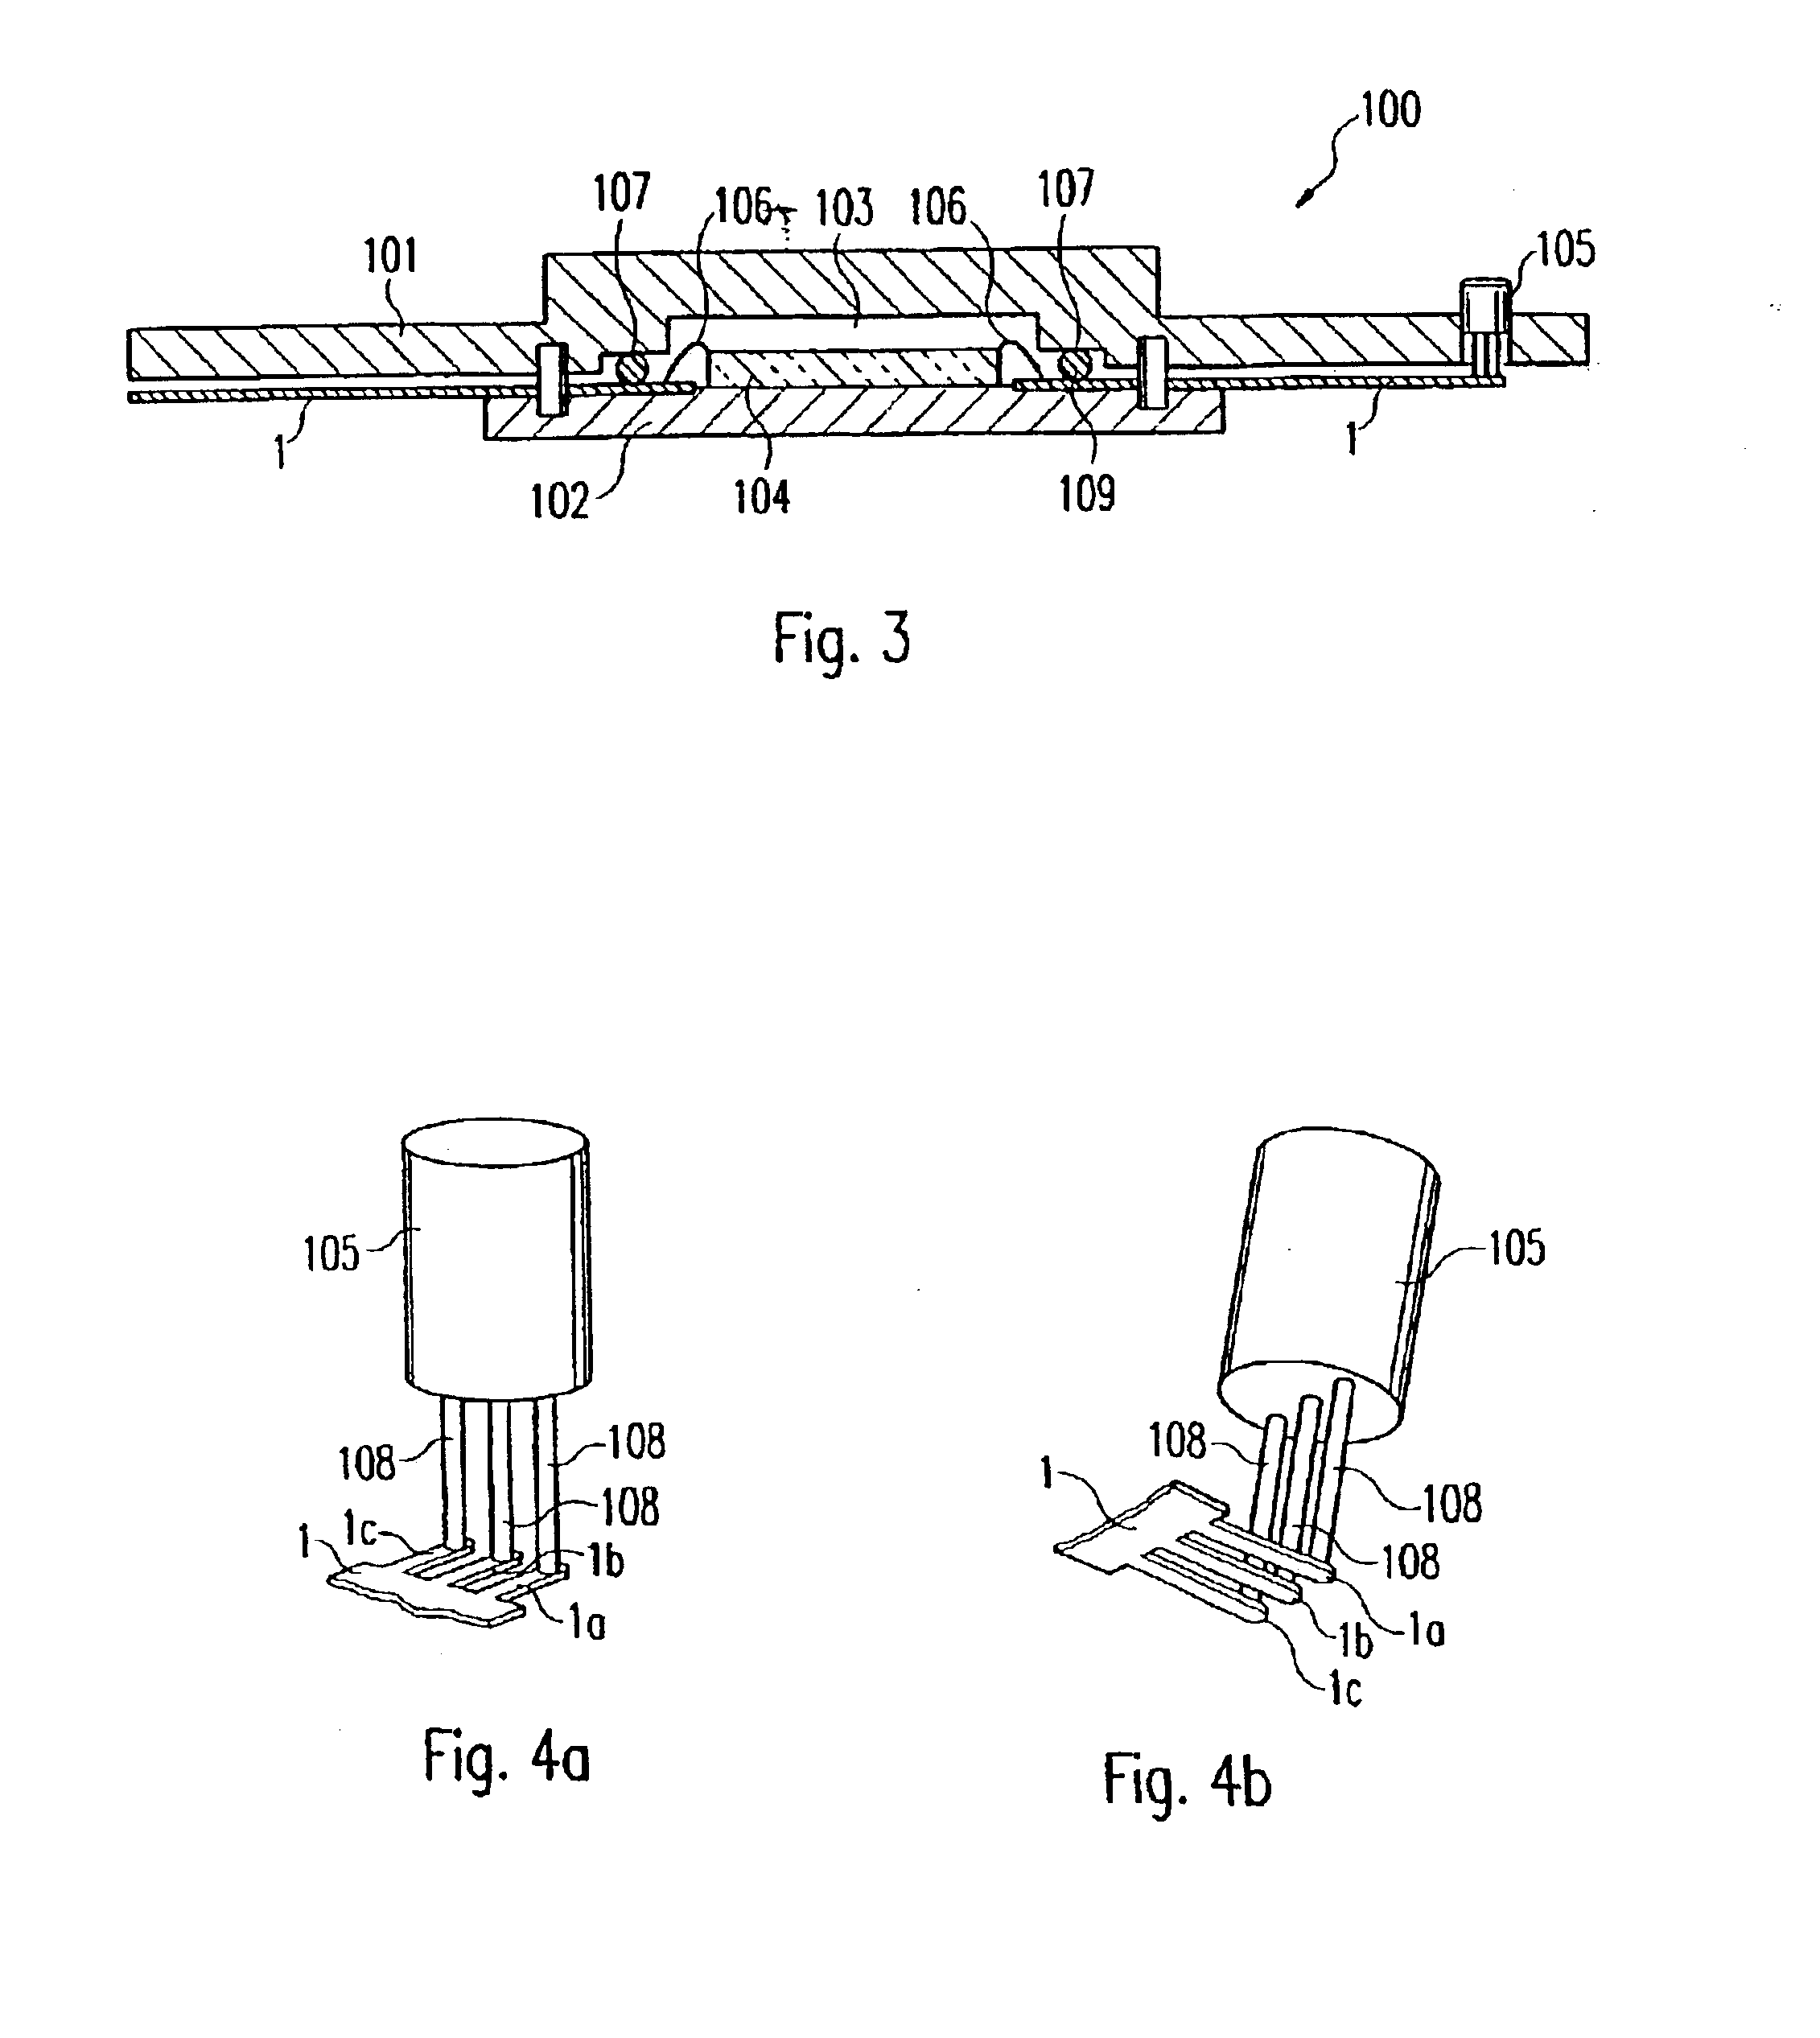 Method of laser welding a flexible circuit board with a metal contact